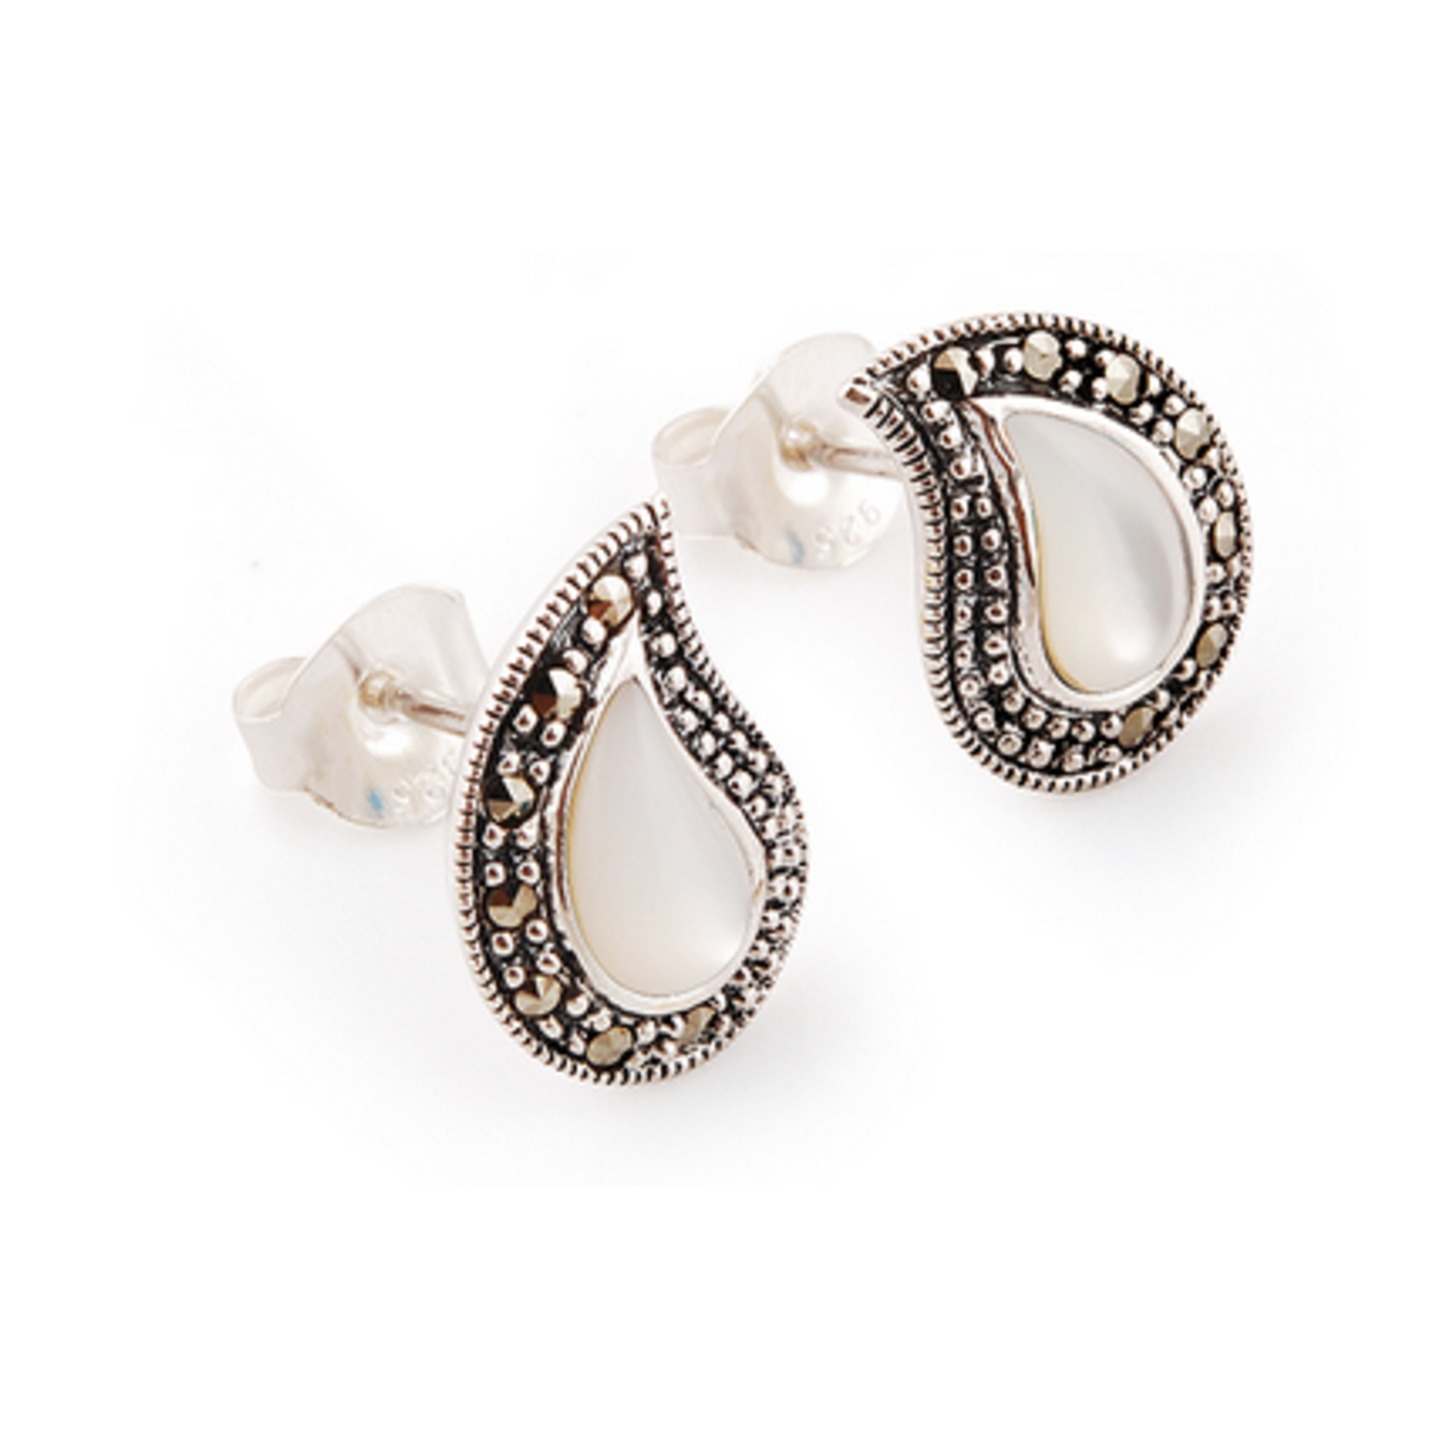 The Mother Of Pearl & Marcasite Silver Earrings